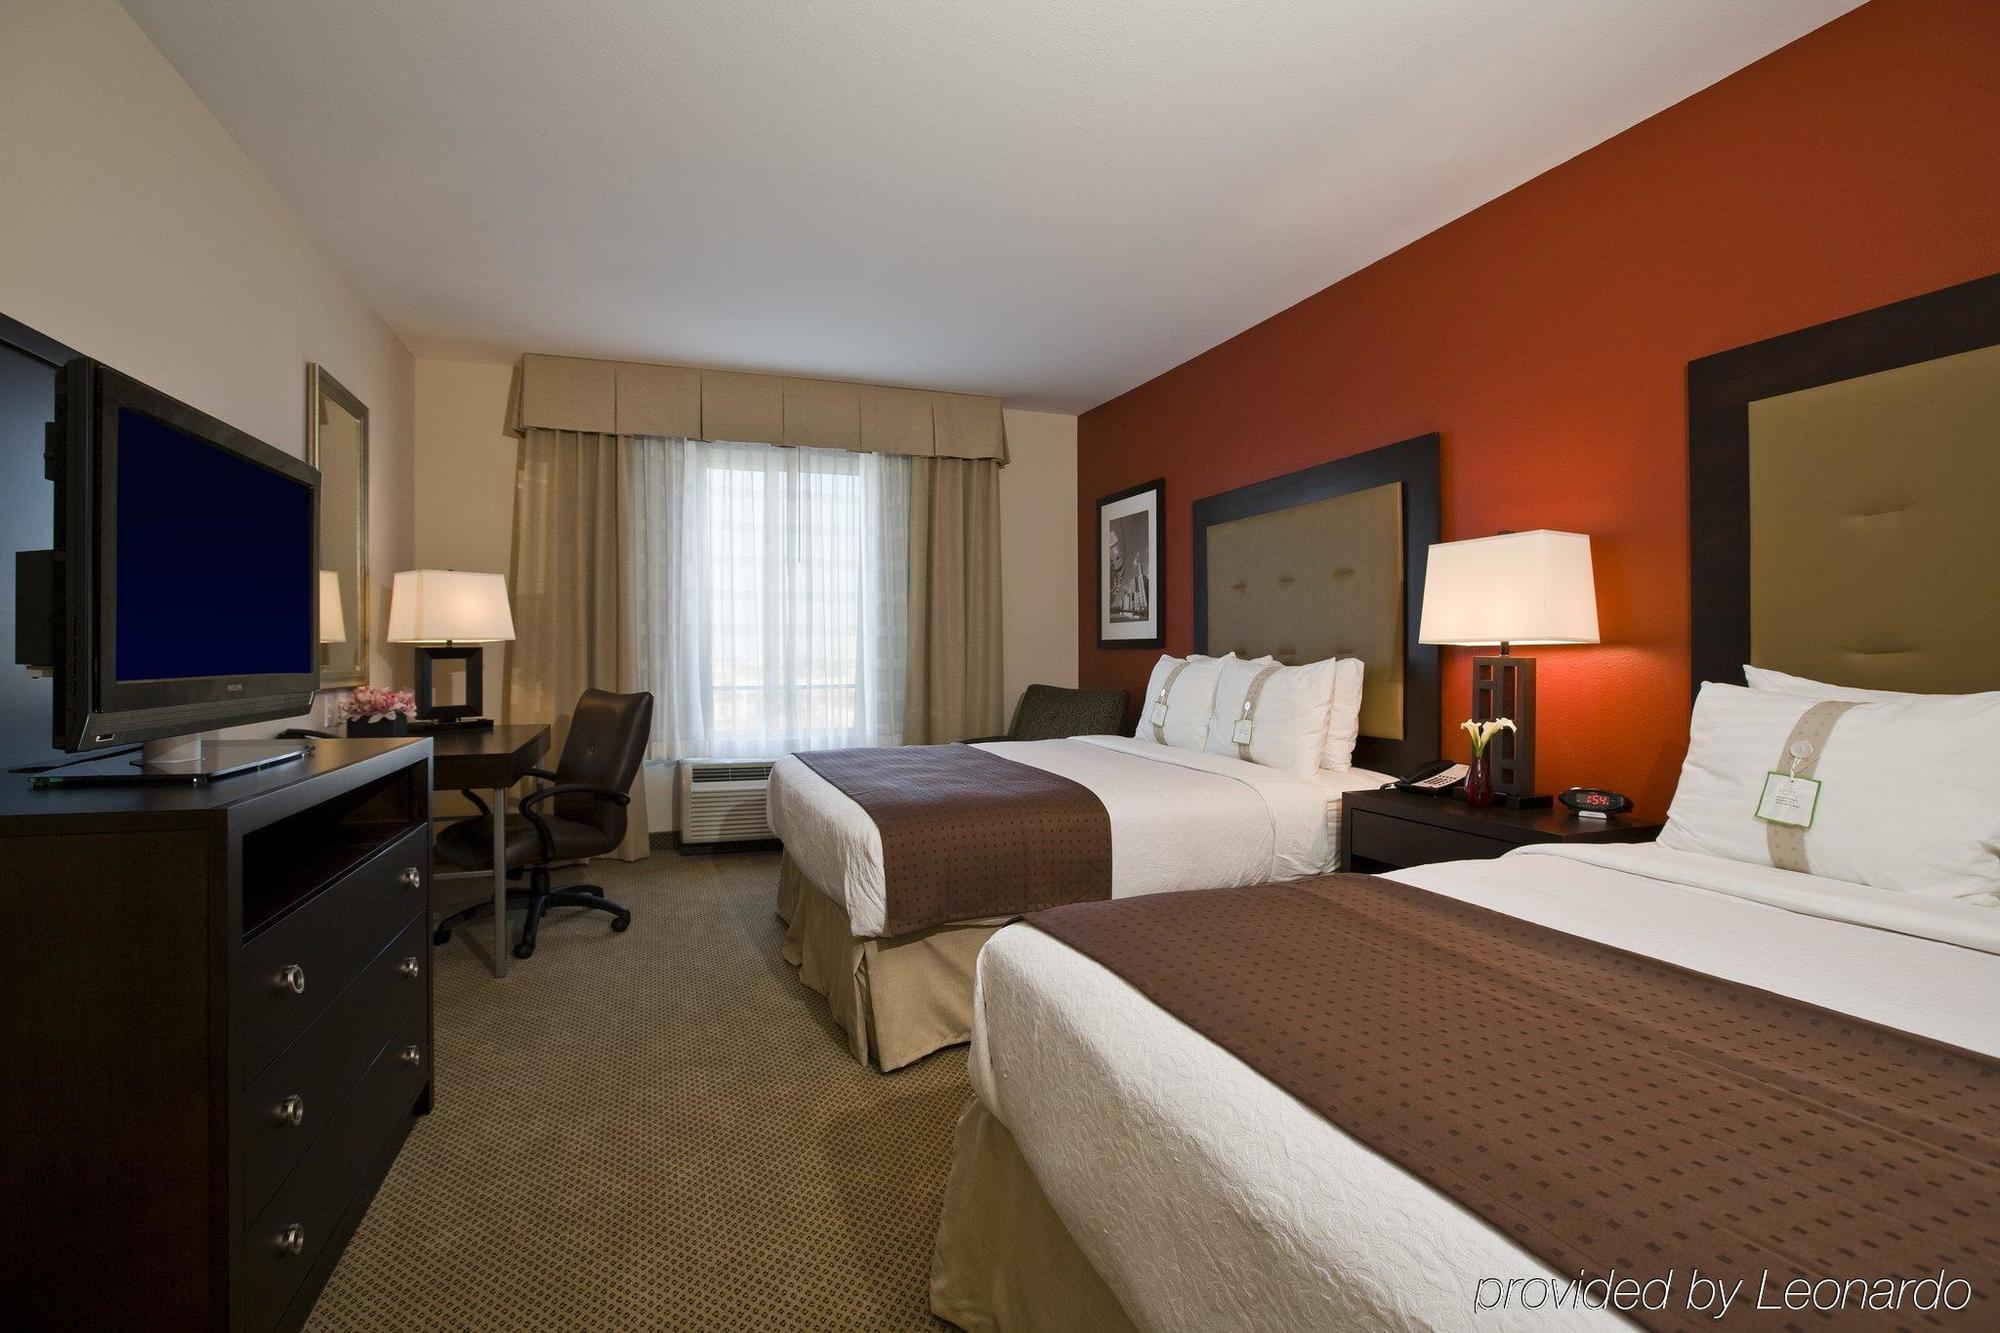 Doubletree By Hilton Chicago Midway Airport, Il Hotel Bedford Park Room photo